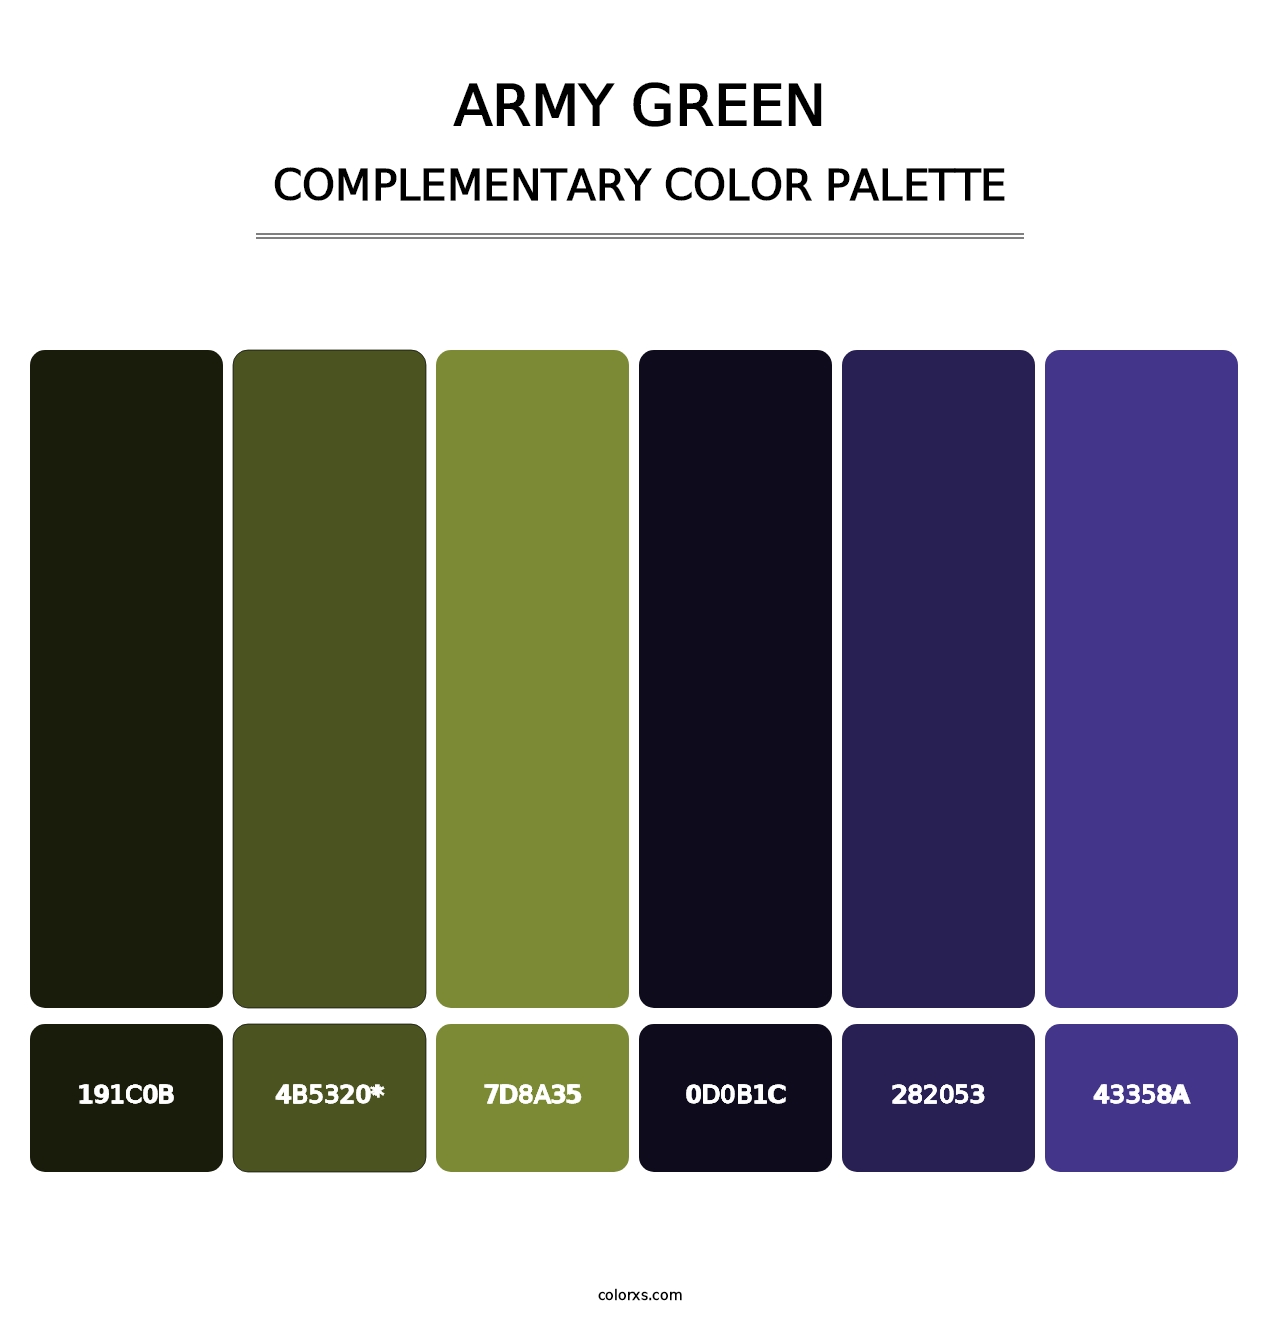 Army Green - Complementary Color Palette